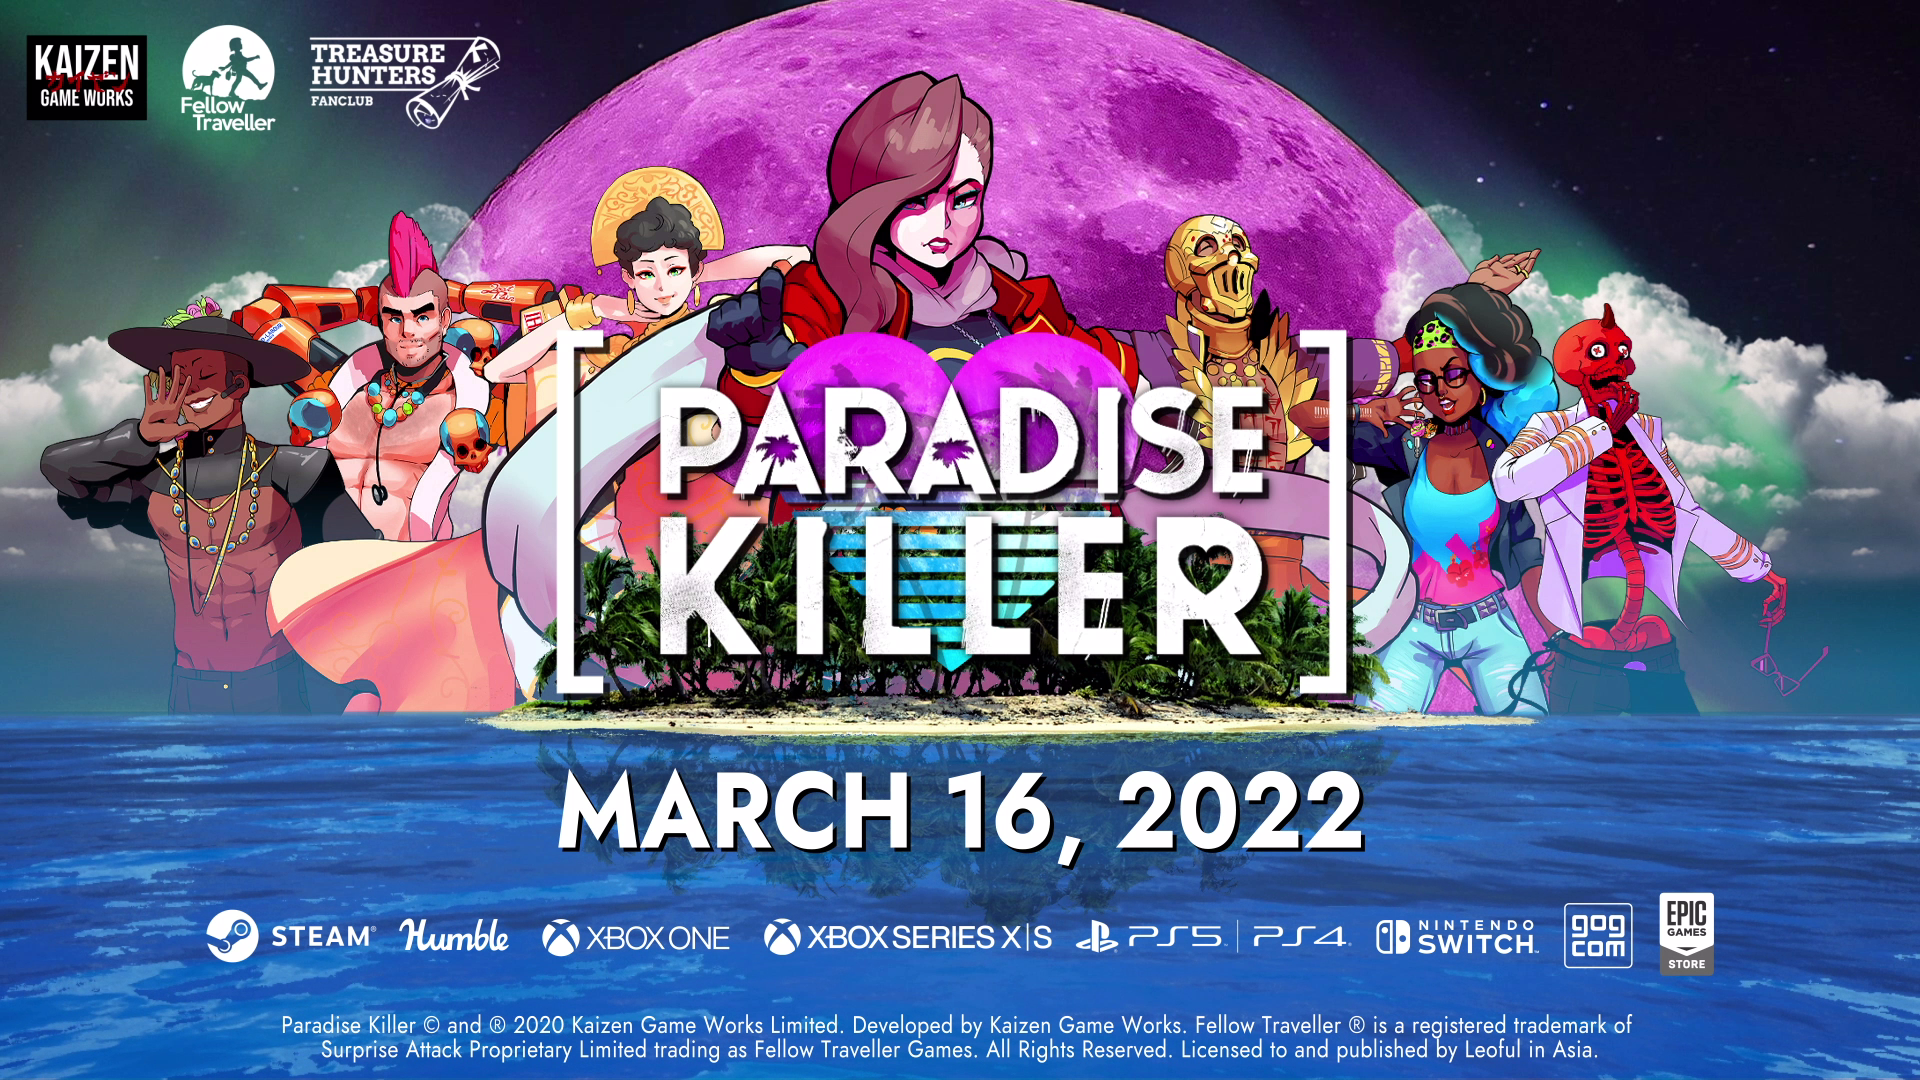 Paradise Killer logo and key art with the date "March 16, 2022"